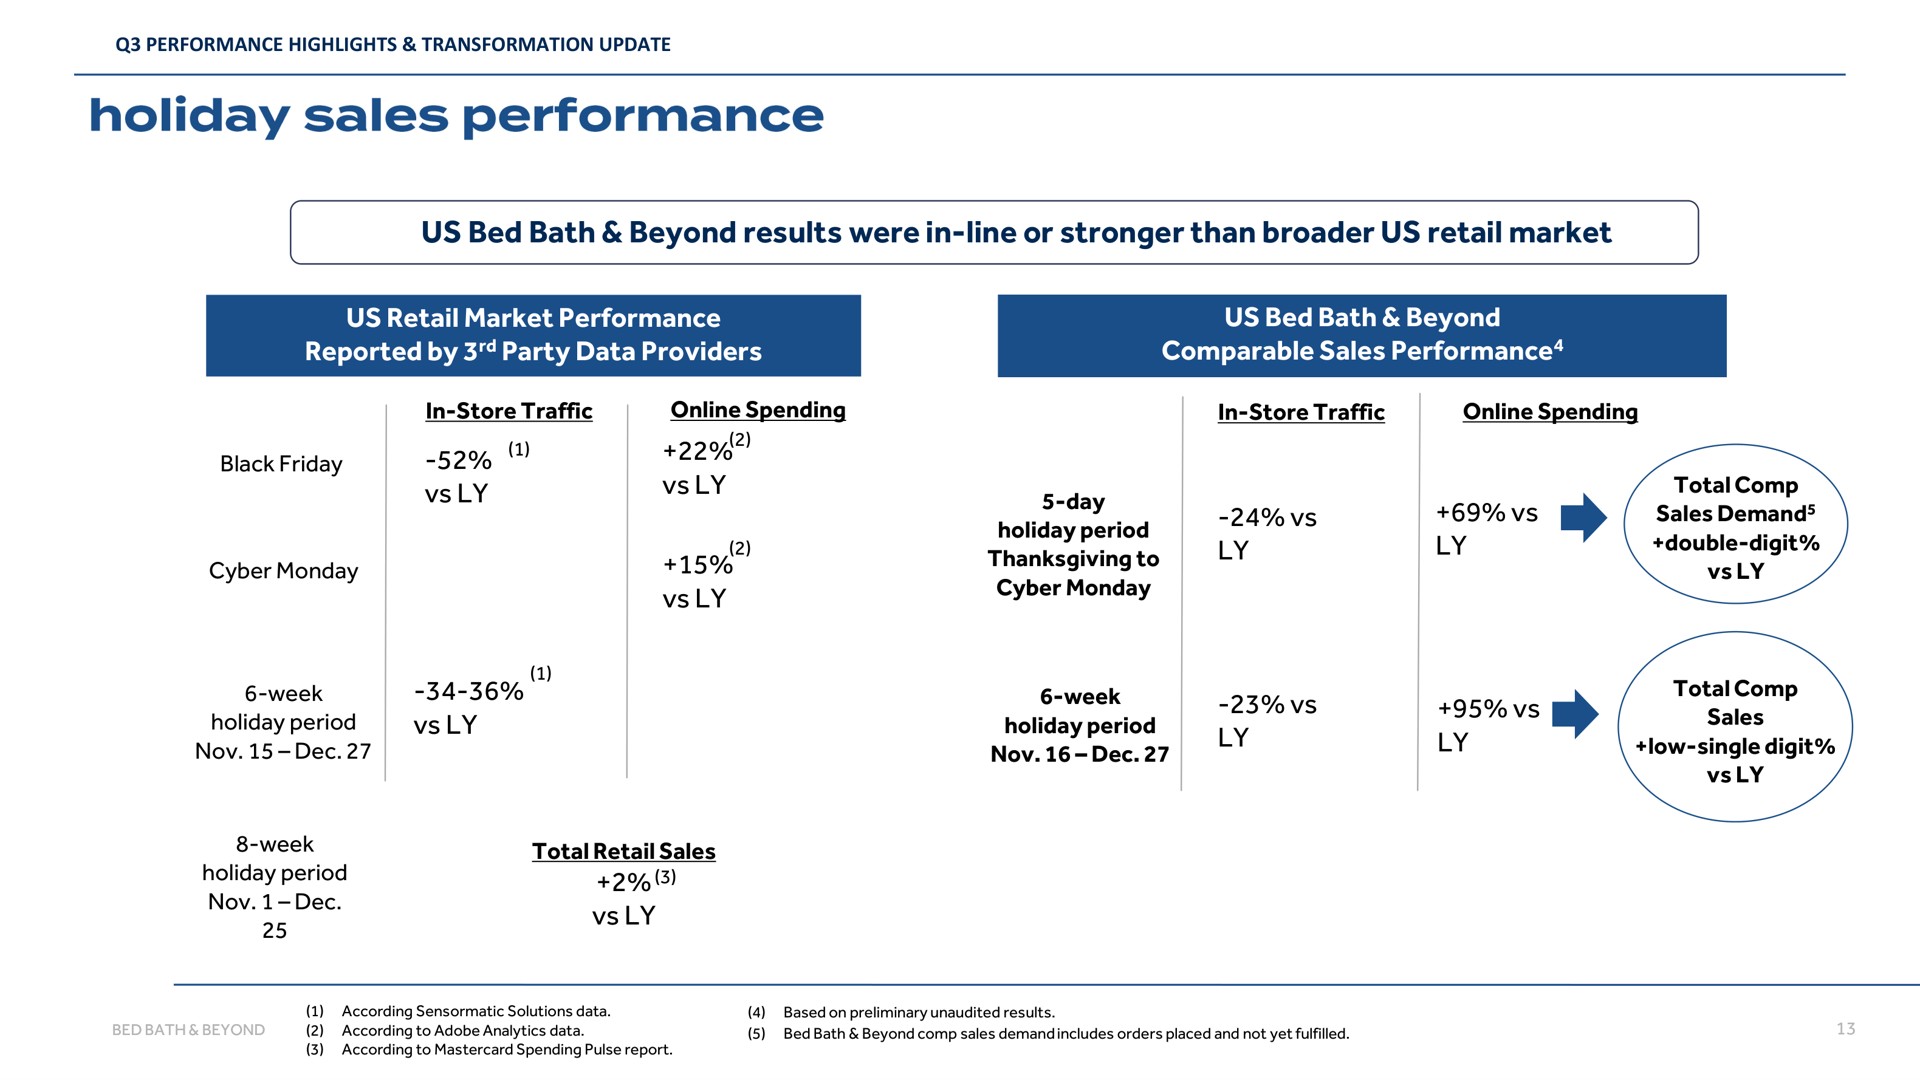 us bed bath beyond results were in line or than us retail market us retail market performance reported by party data providers us bed bath beyond comparable sales performance in store traffic spending in store traffic spending black week holiday period week holiday period total retail sales day holiday period thanksgiving to week holiday period total sales demand double digit total sales low single digit | Bed Bath & Beyond